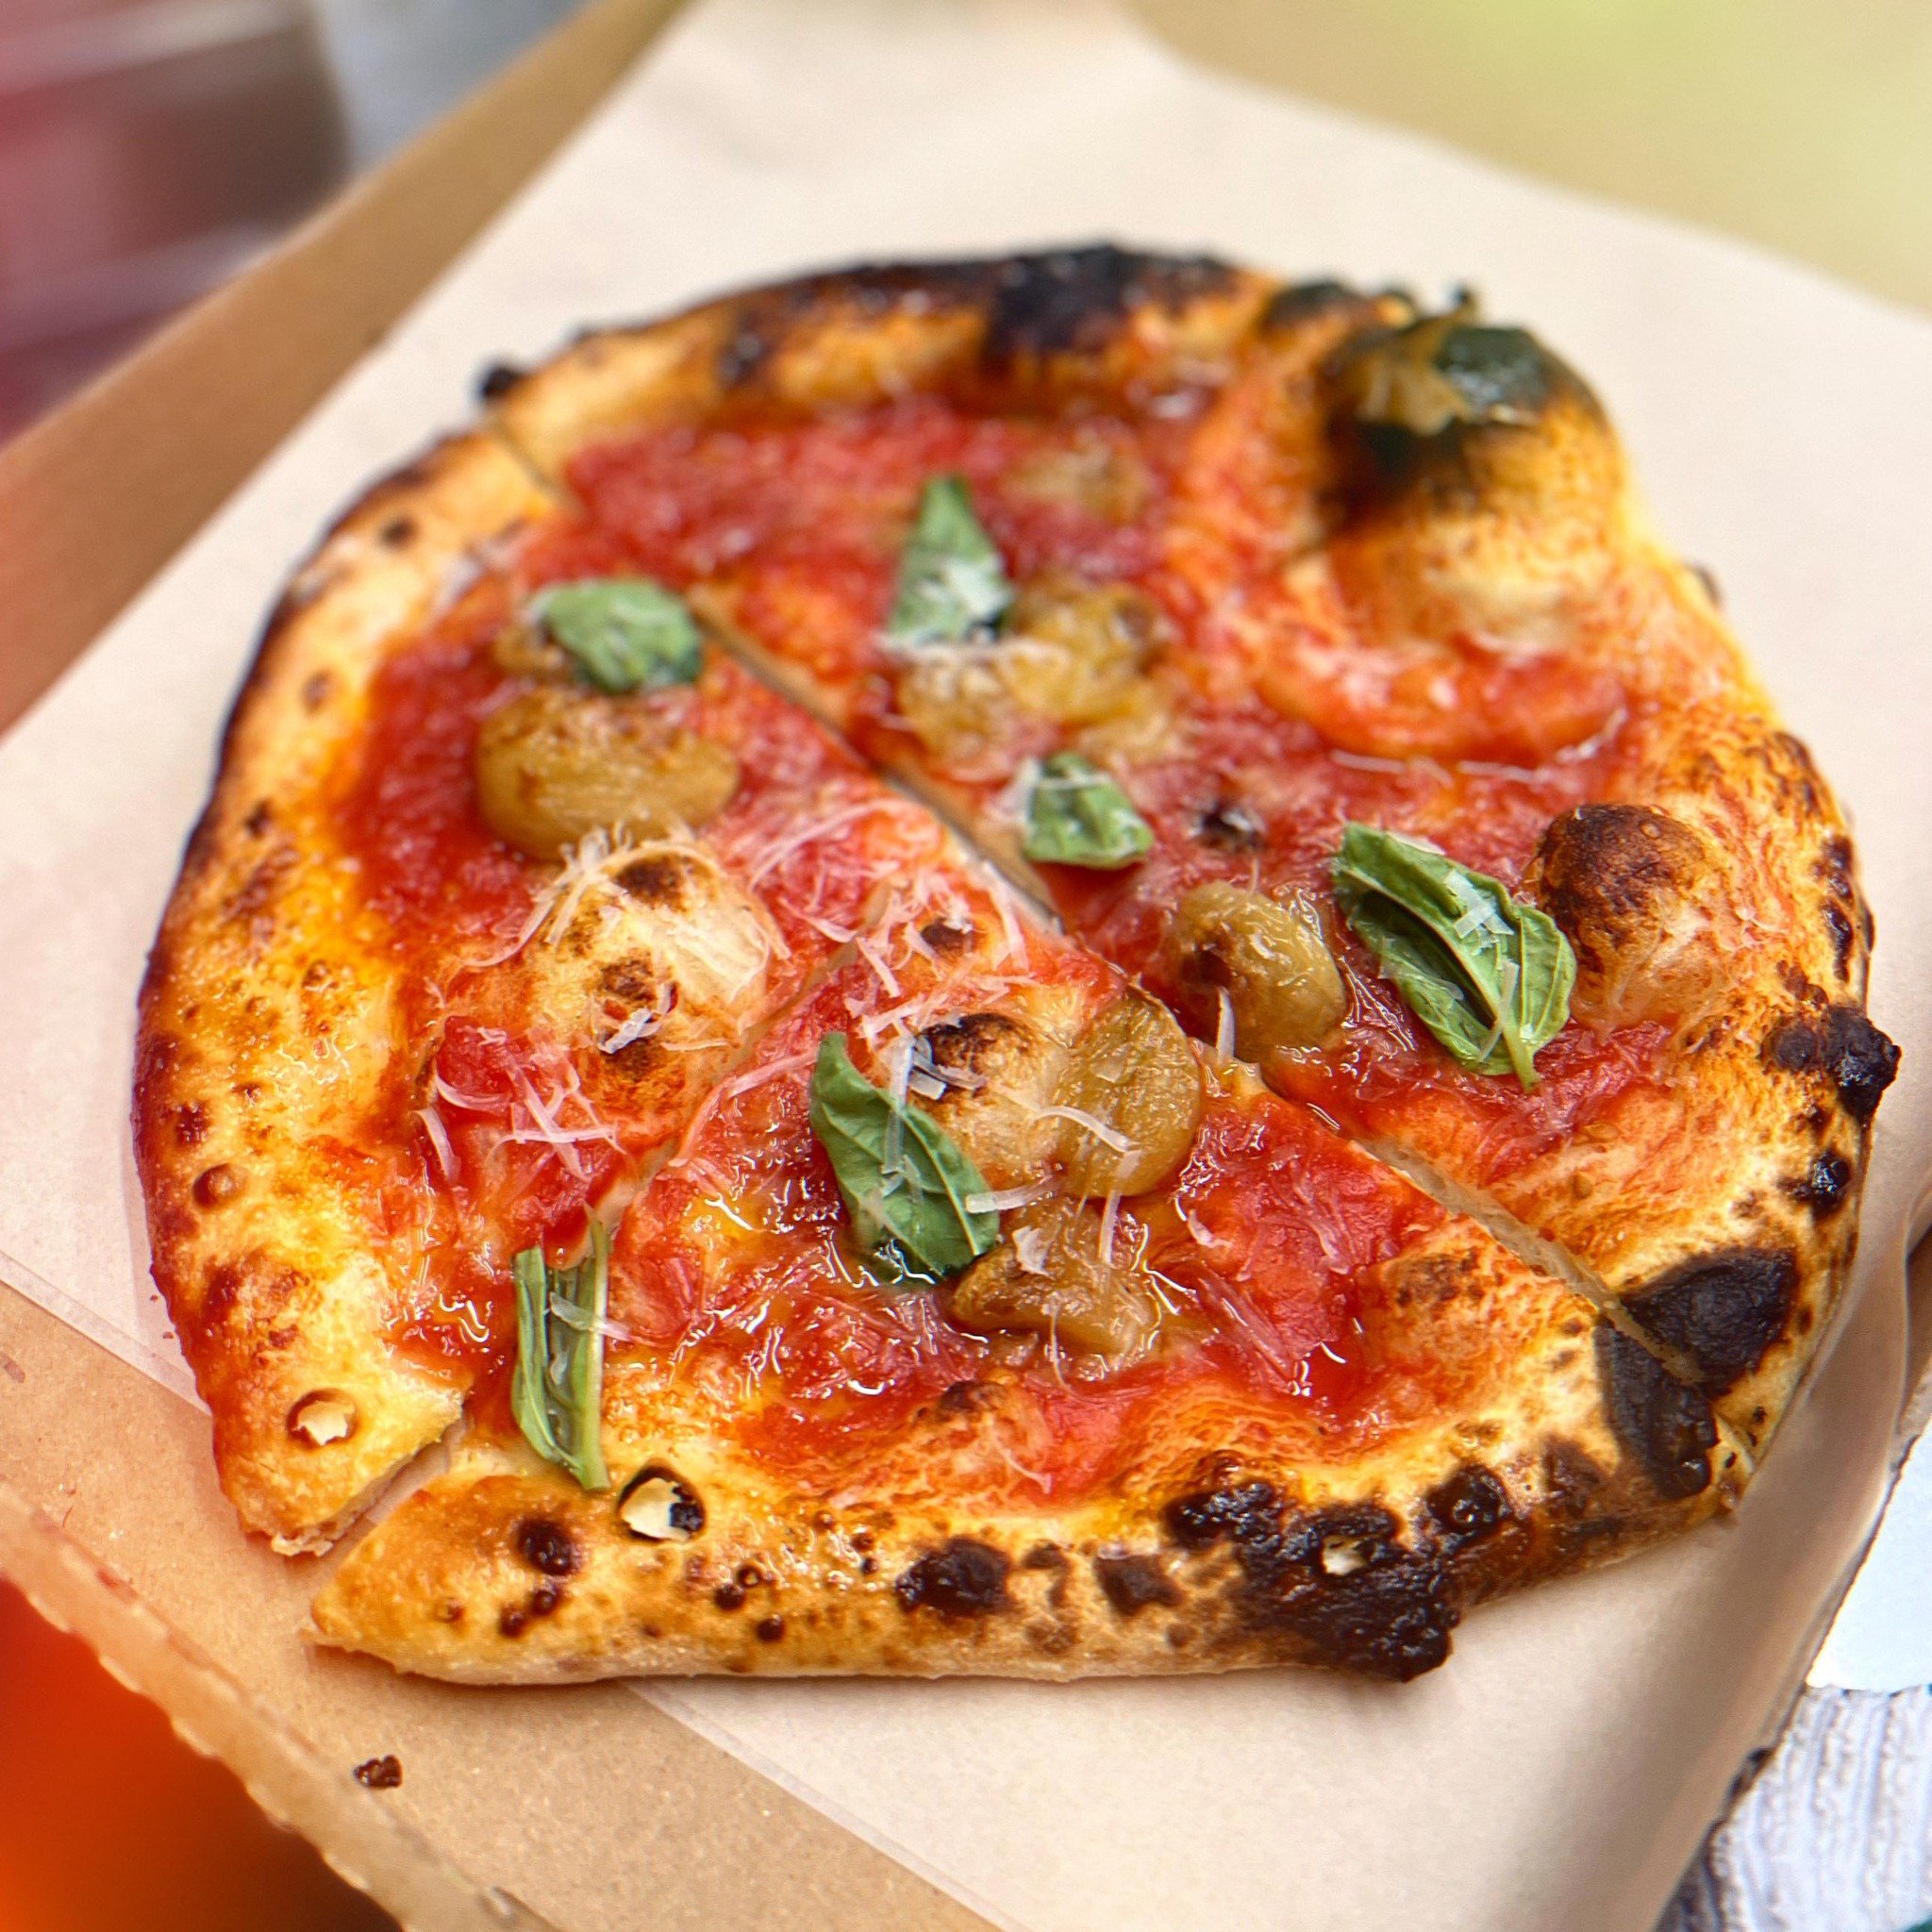 Pizza for lunch tomorrow! We&rsquo;ve been obsessed with our sourdough pizza lately . Typically sold only at night we thought we&rsquo;d share it in the afternoon. Should be make pizza a regular thing? 🤔 🧐 🤨